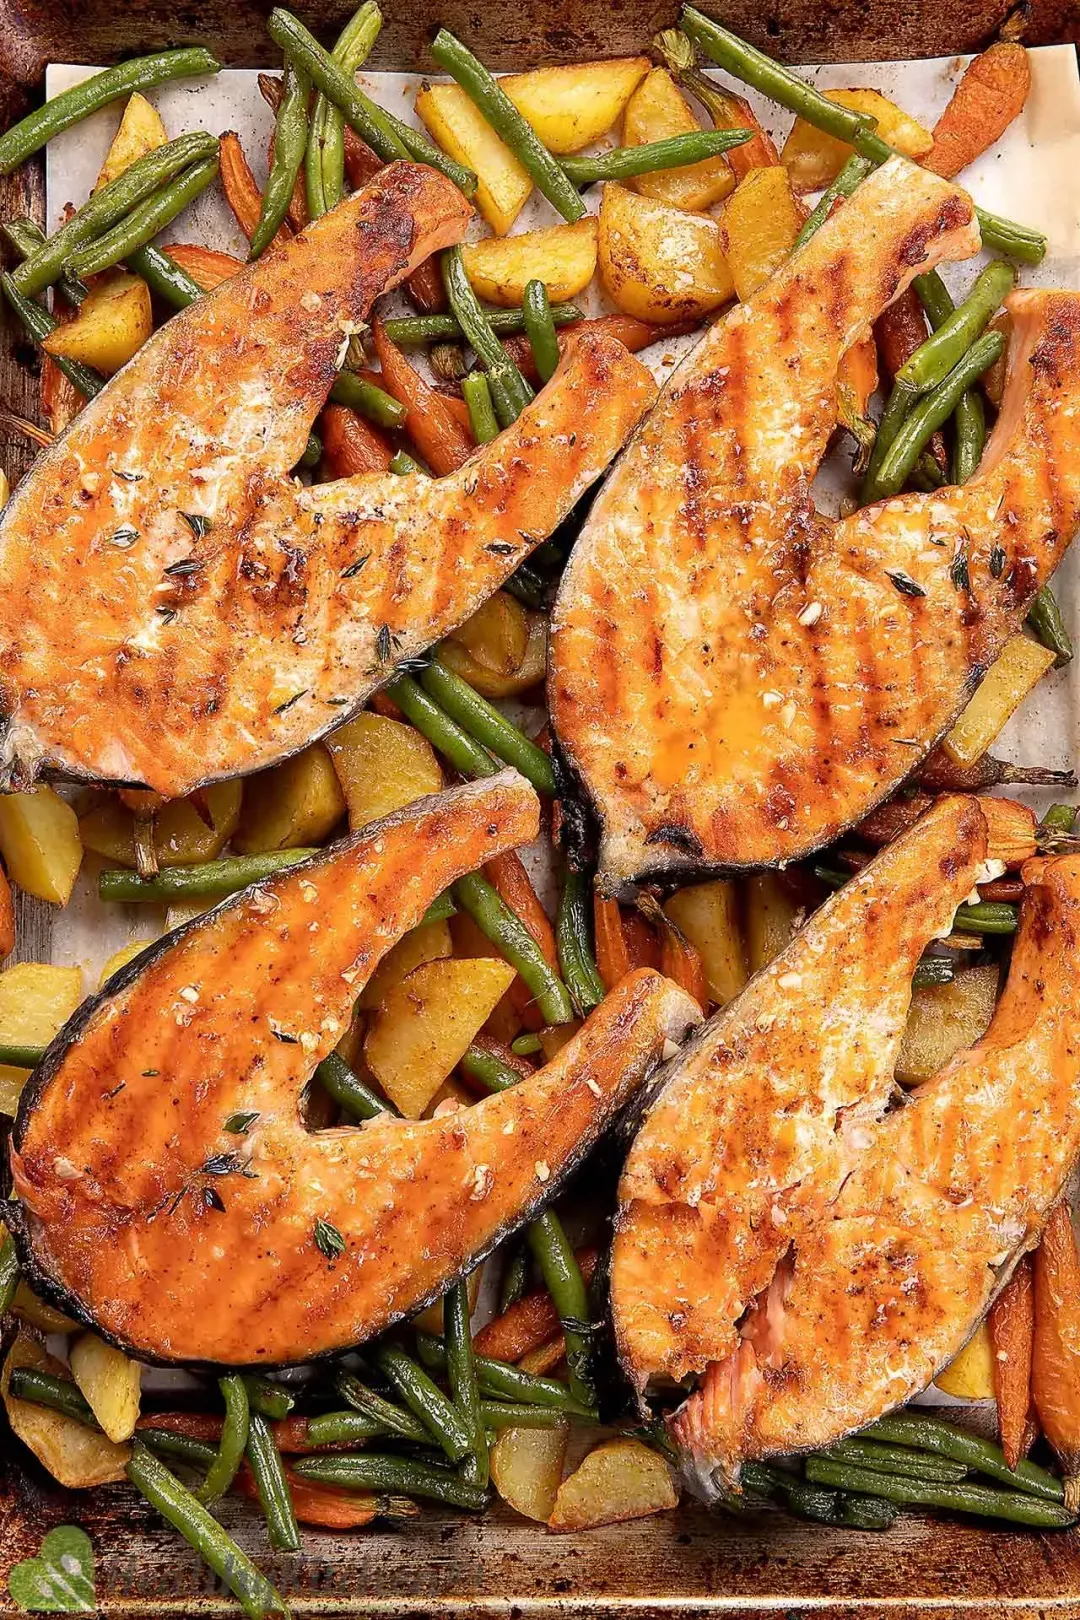 Four salmon steaks with charred marks sitting atop a tray of roasted baby potatoes, carrots, and string beans